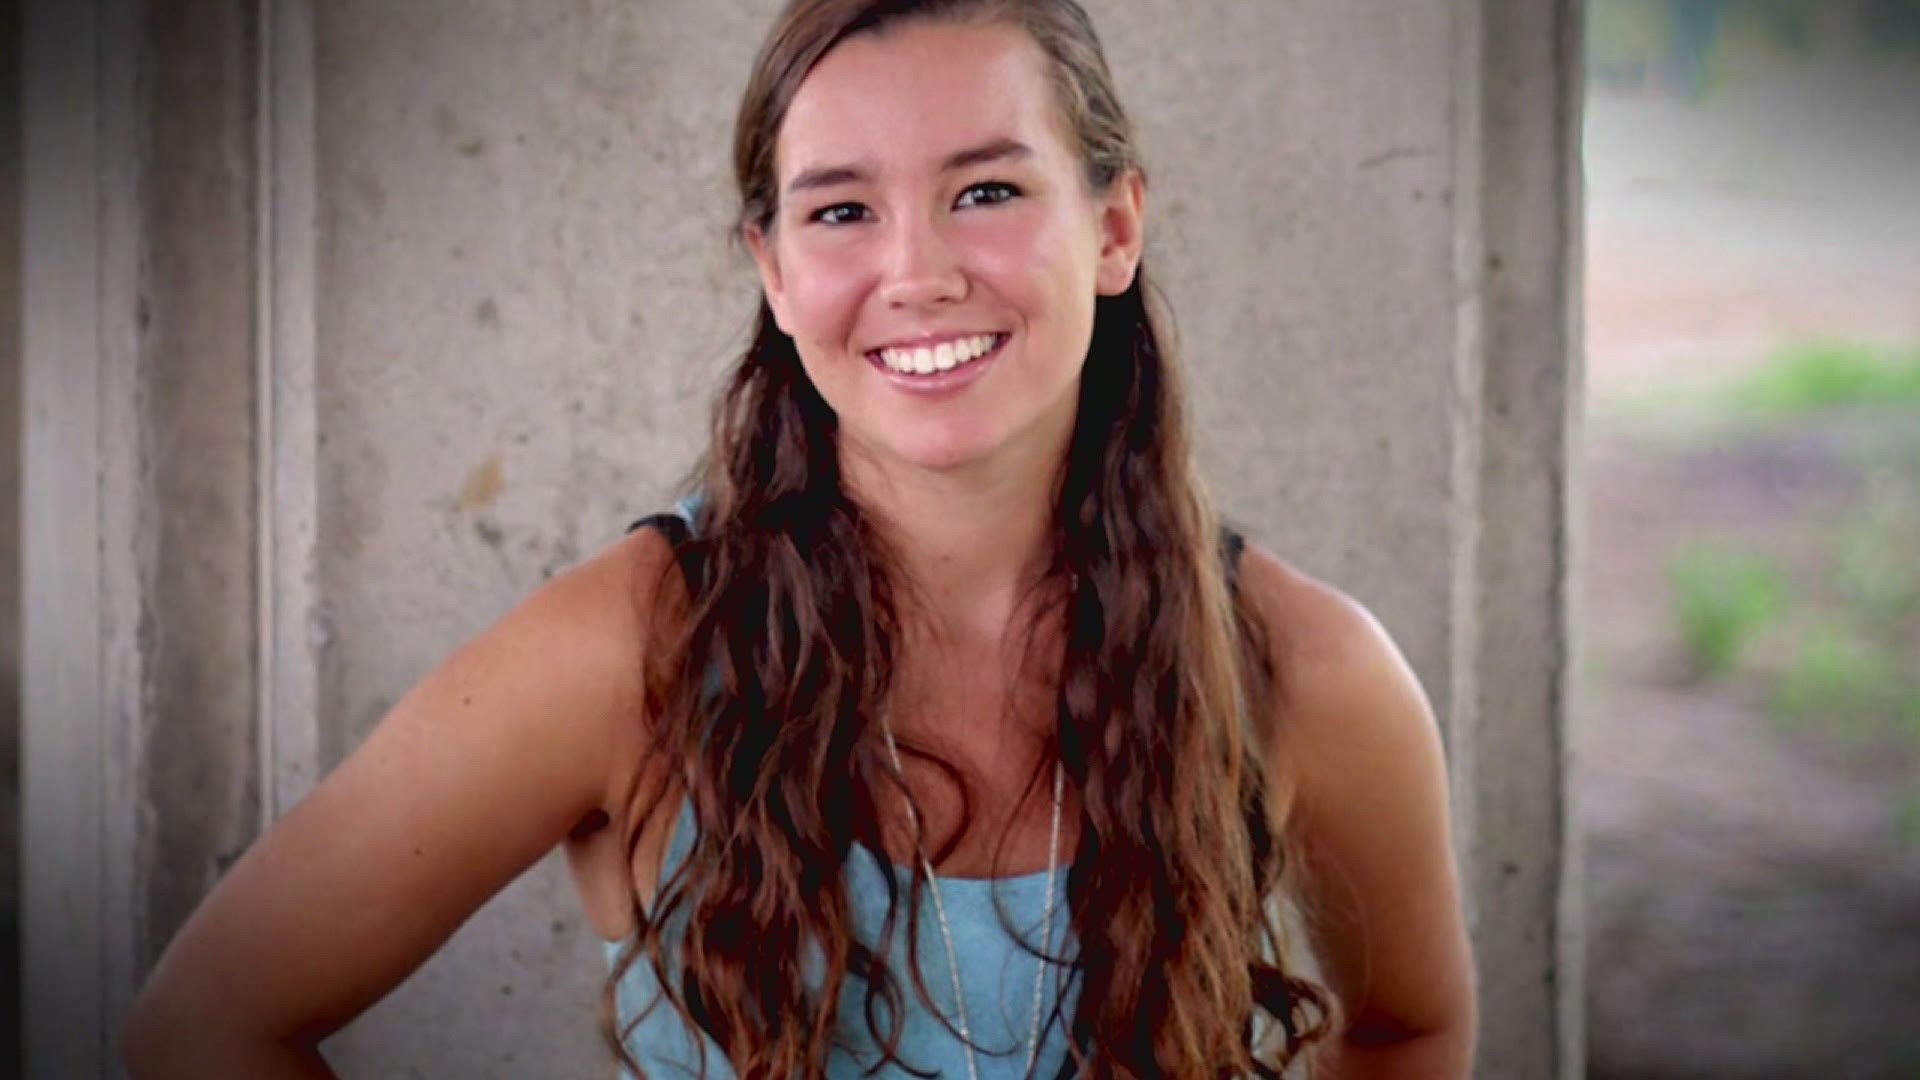 An inmate testified that he had additional information in the death of Mollie Tibbetts.